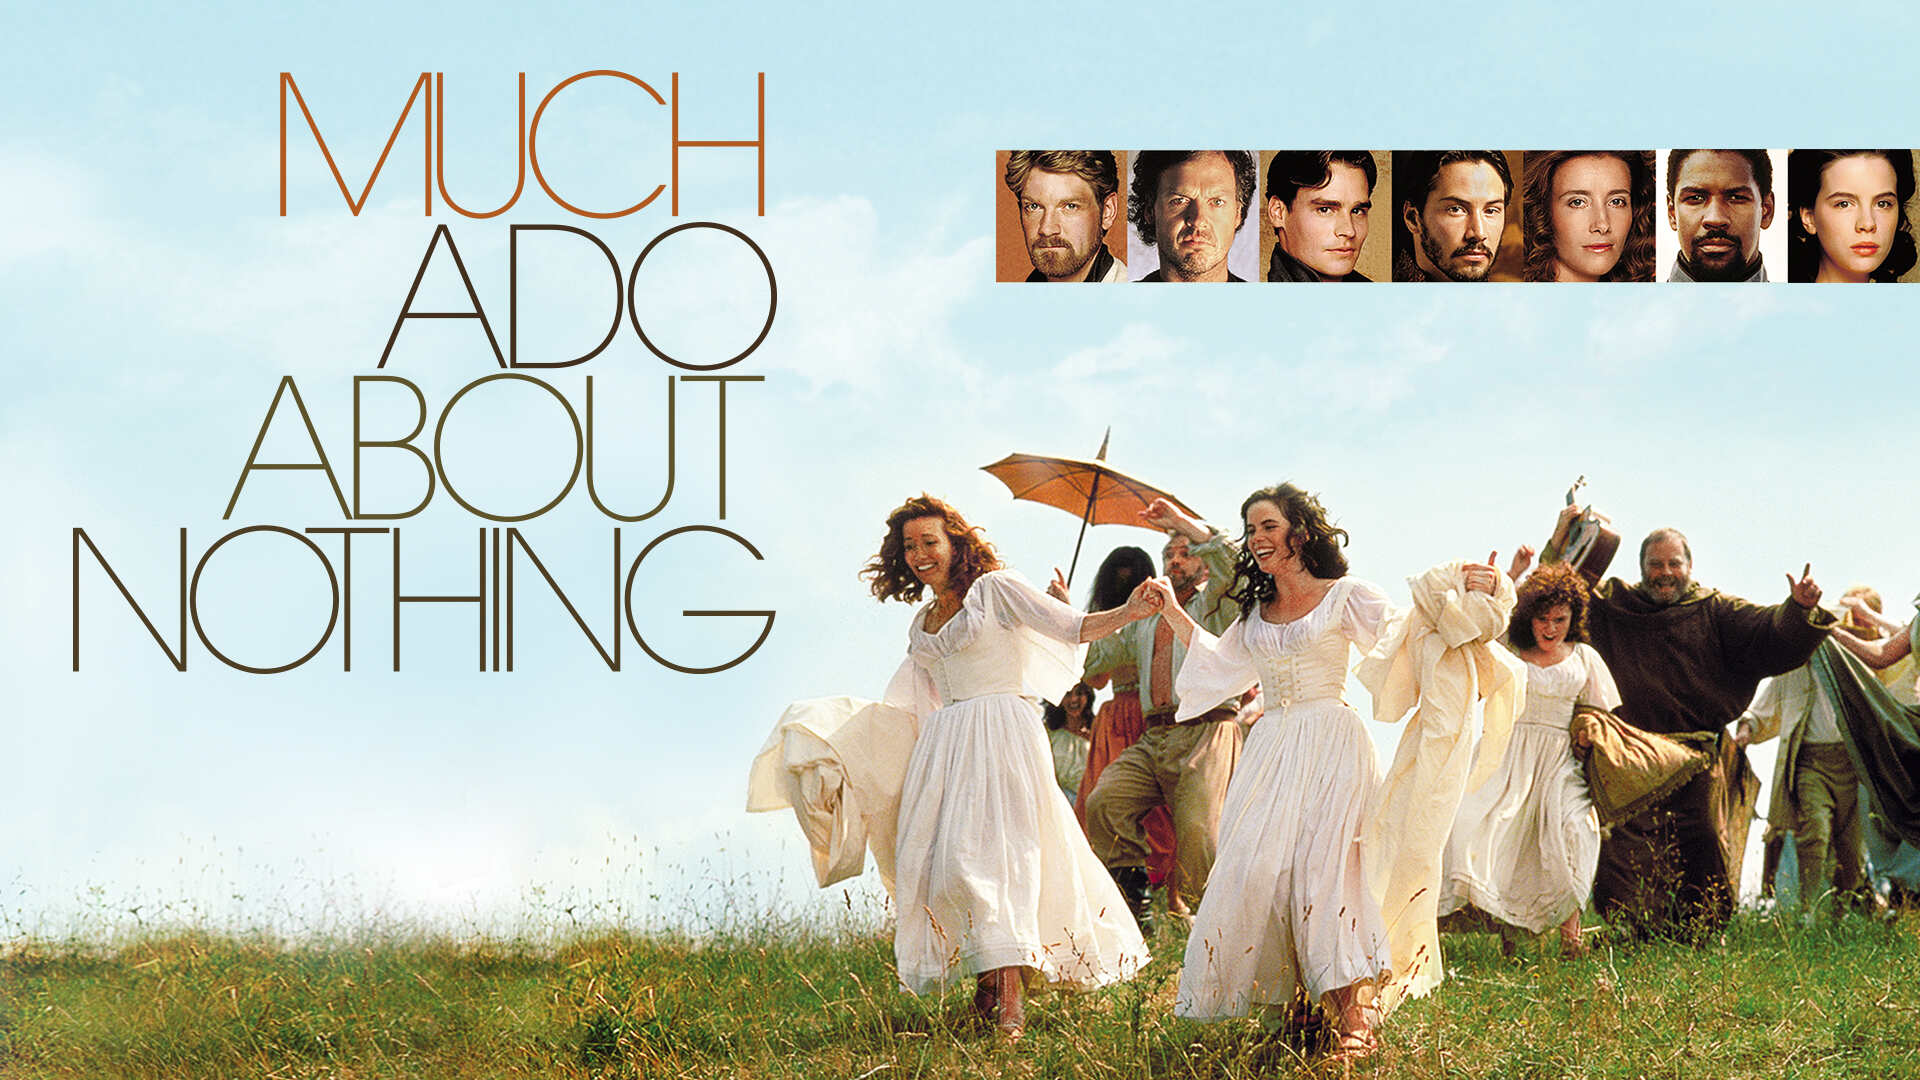 35-facts-about-the-movie-much-ado-about-nothing